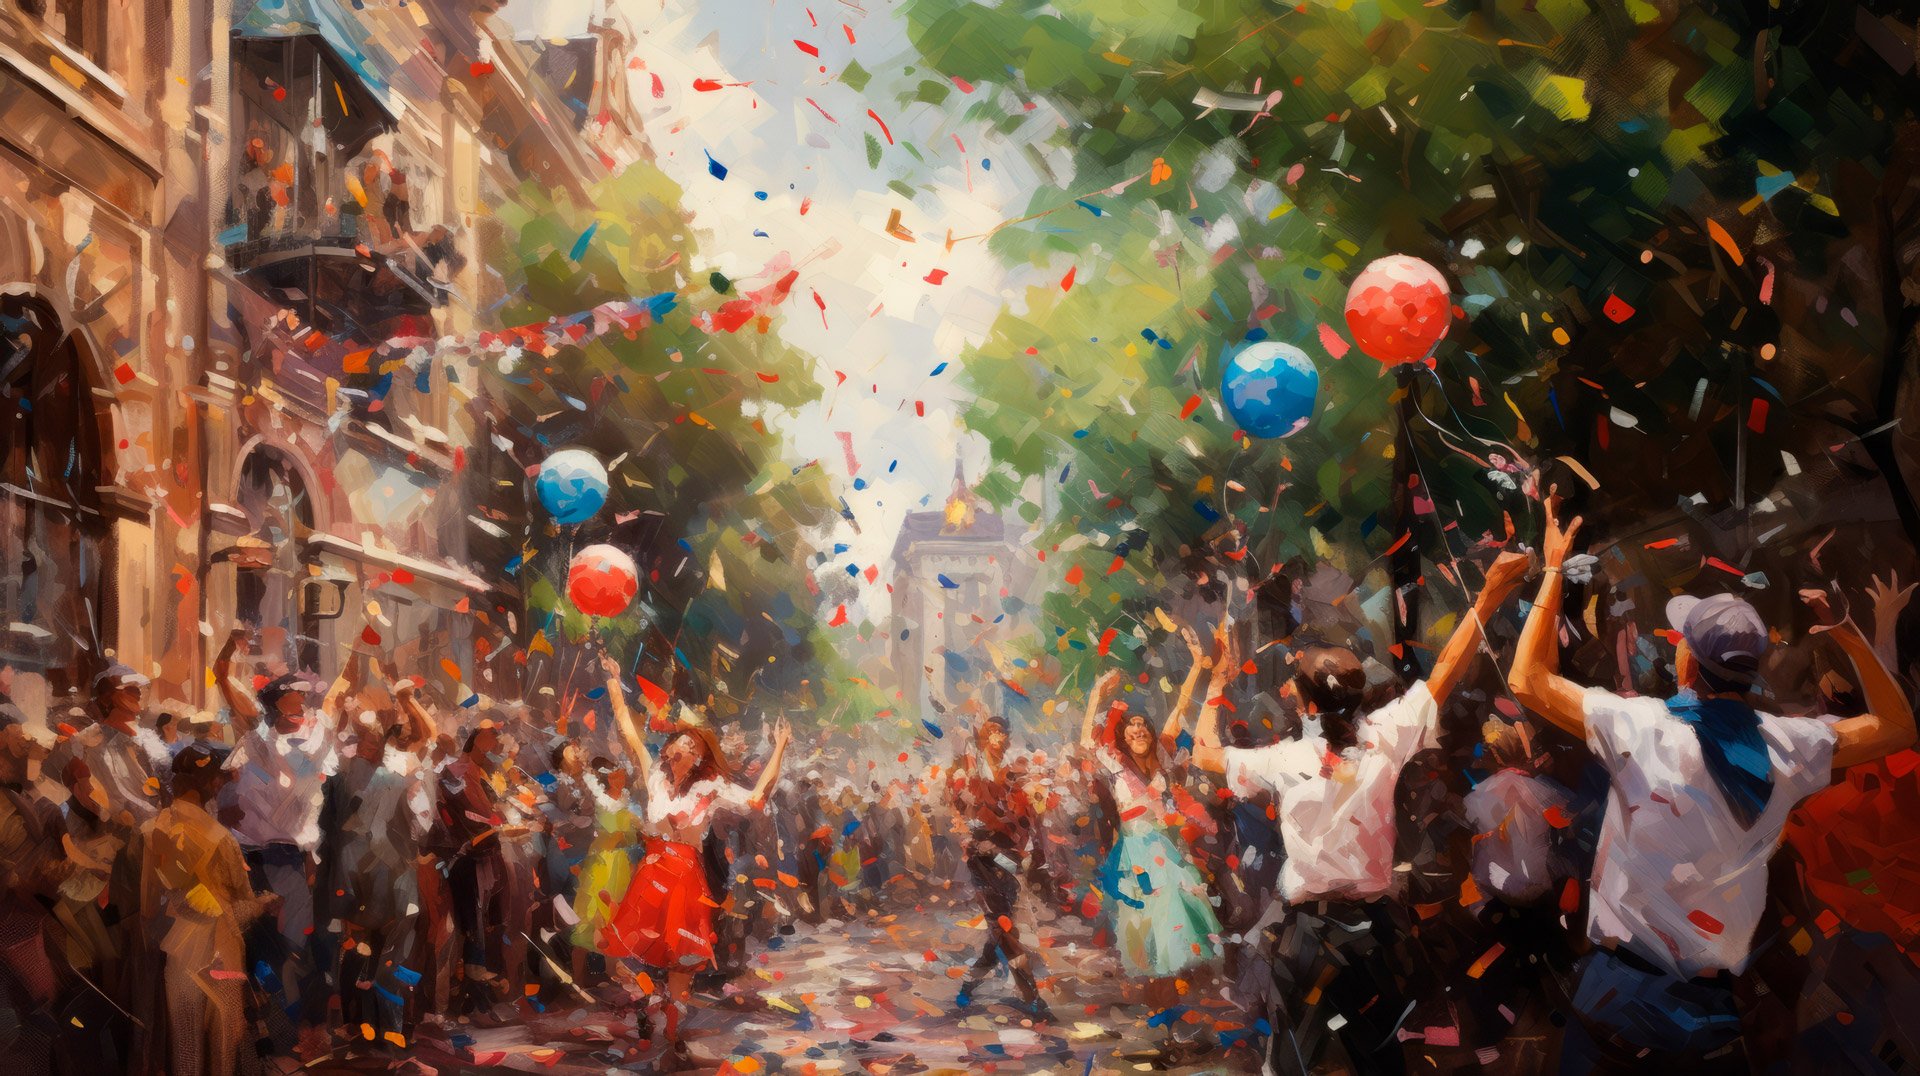 Confetti, balloons and dancing in a picturesque street. It must be VoiceMap’s birthday!